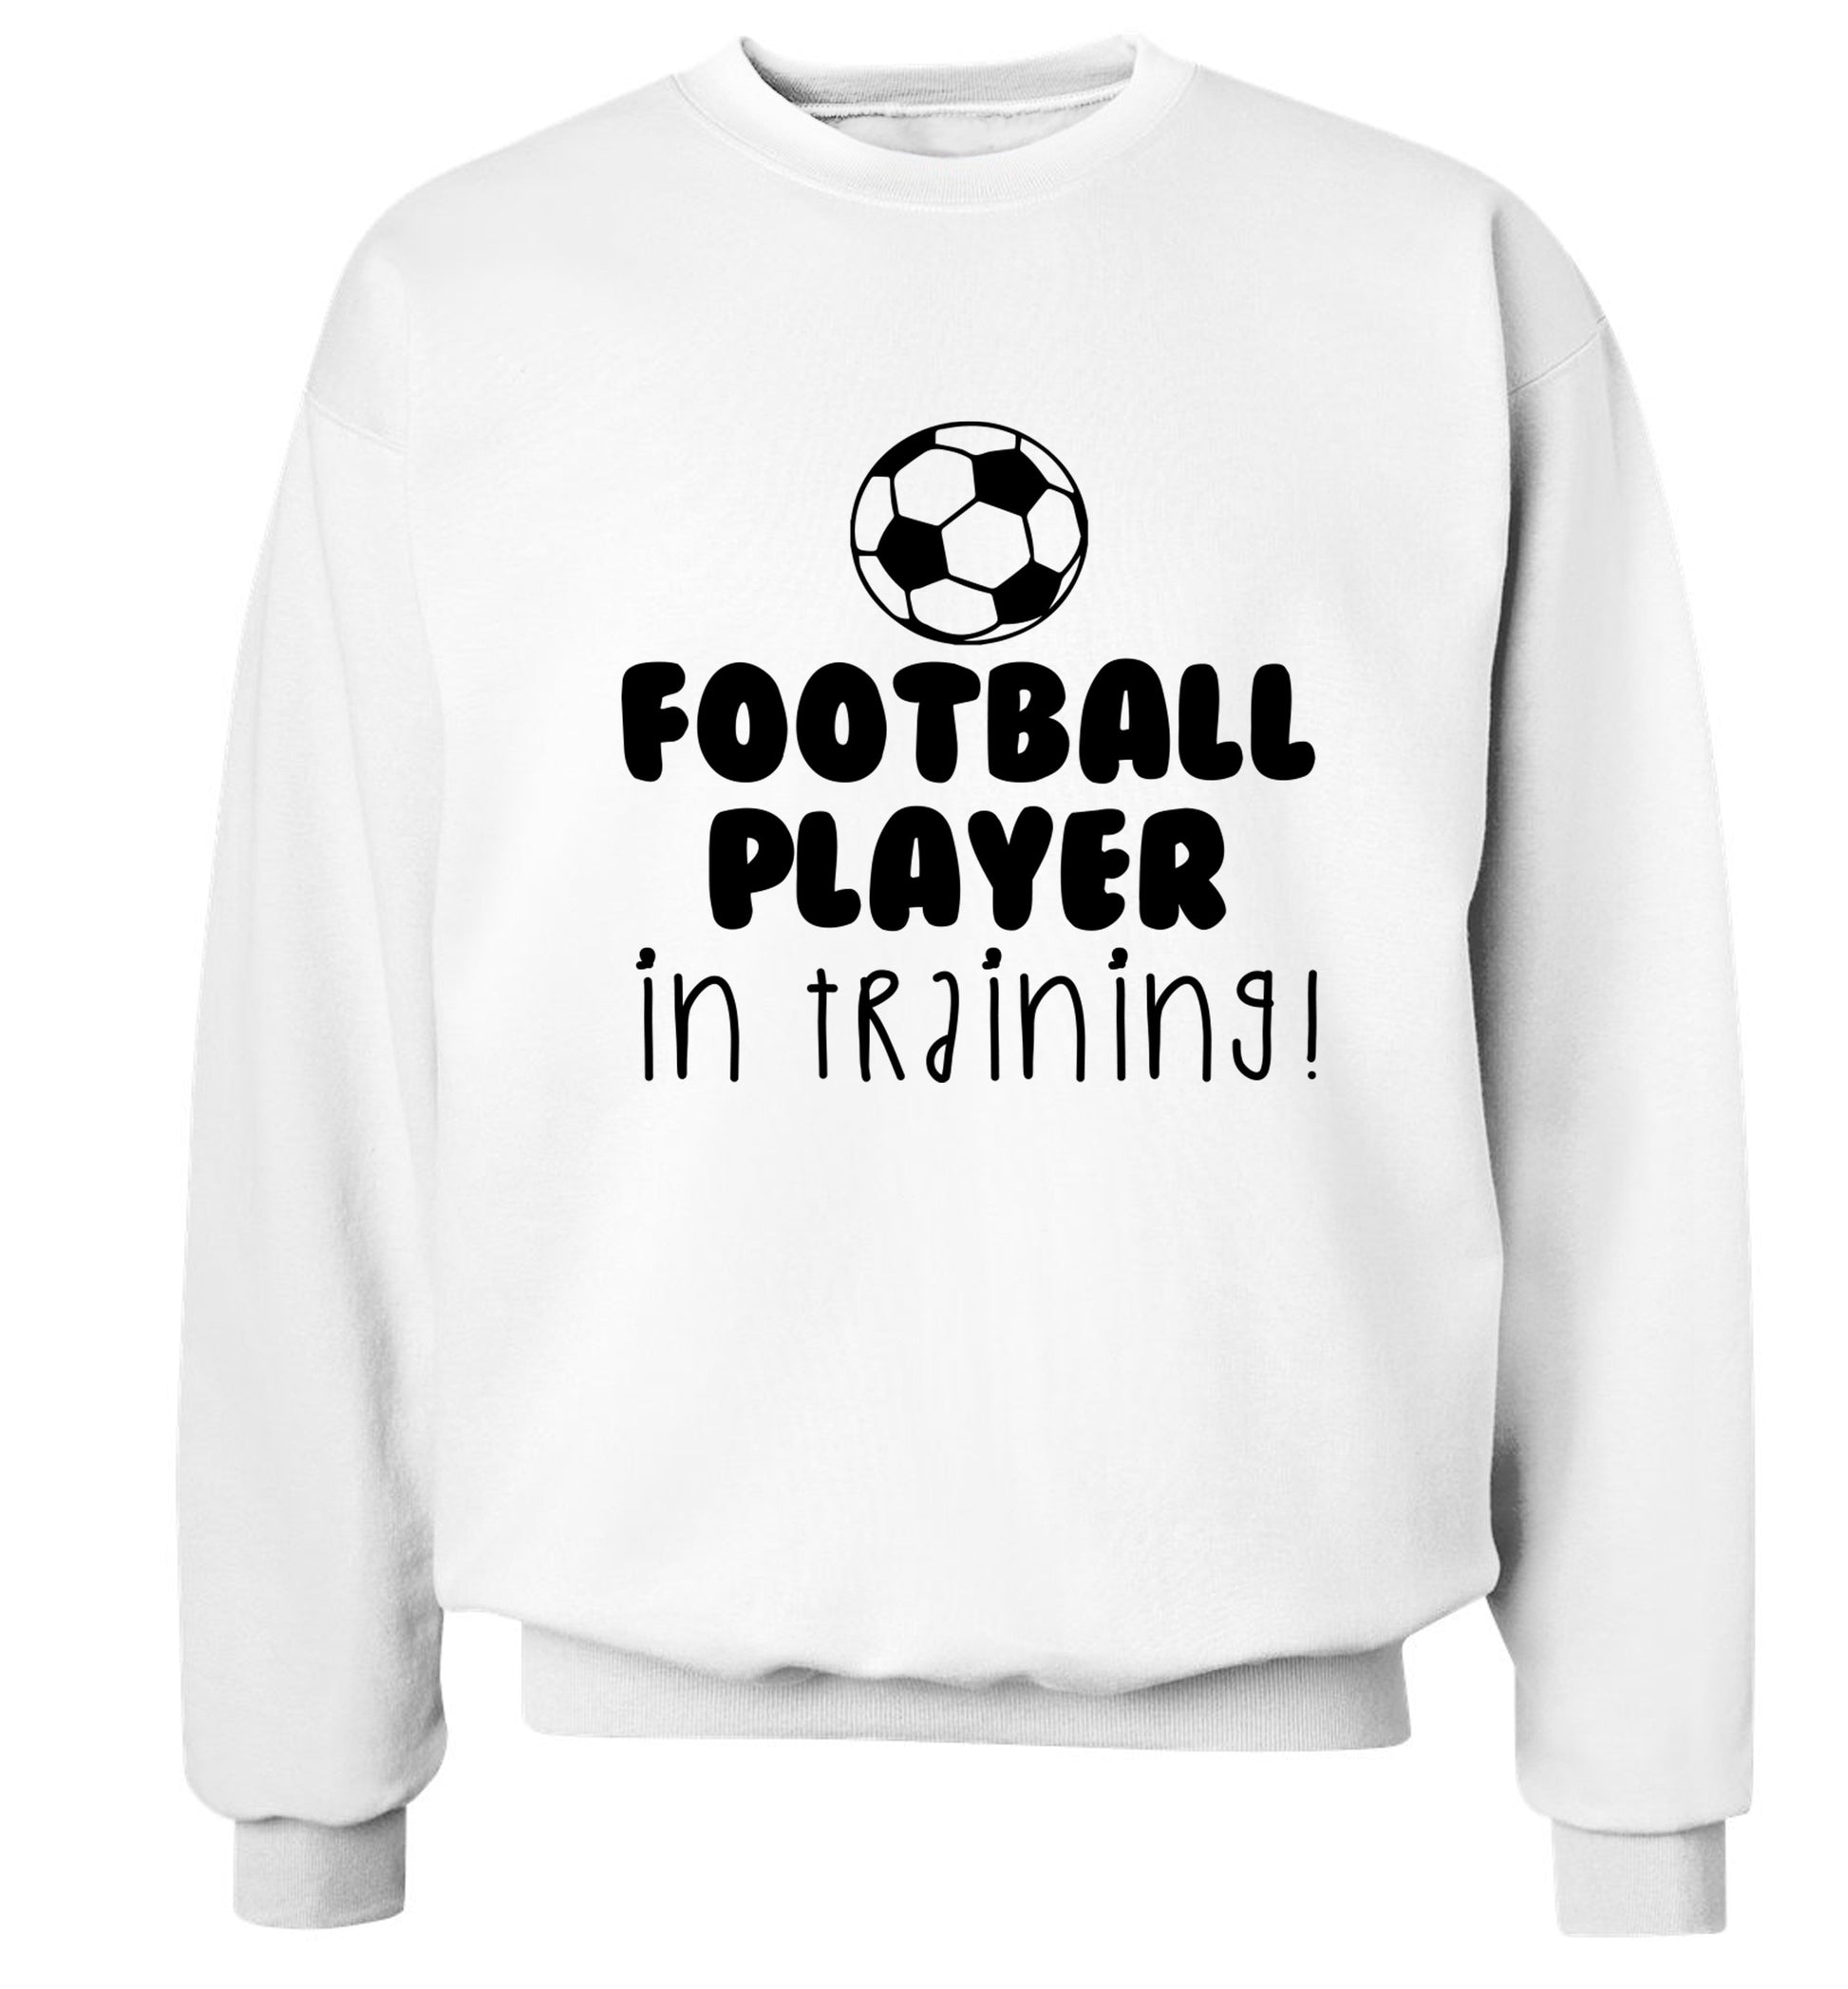 Football player in training Adult's unisex white Sweater 2XL